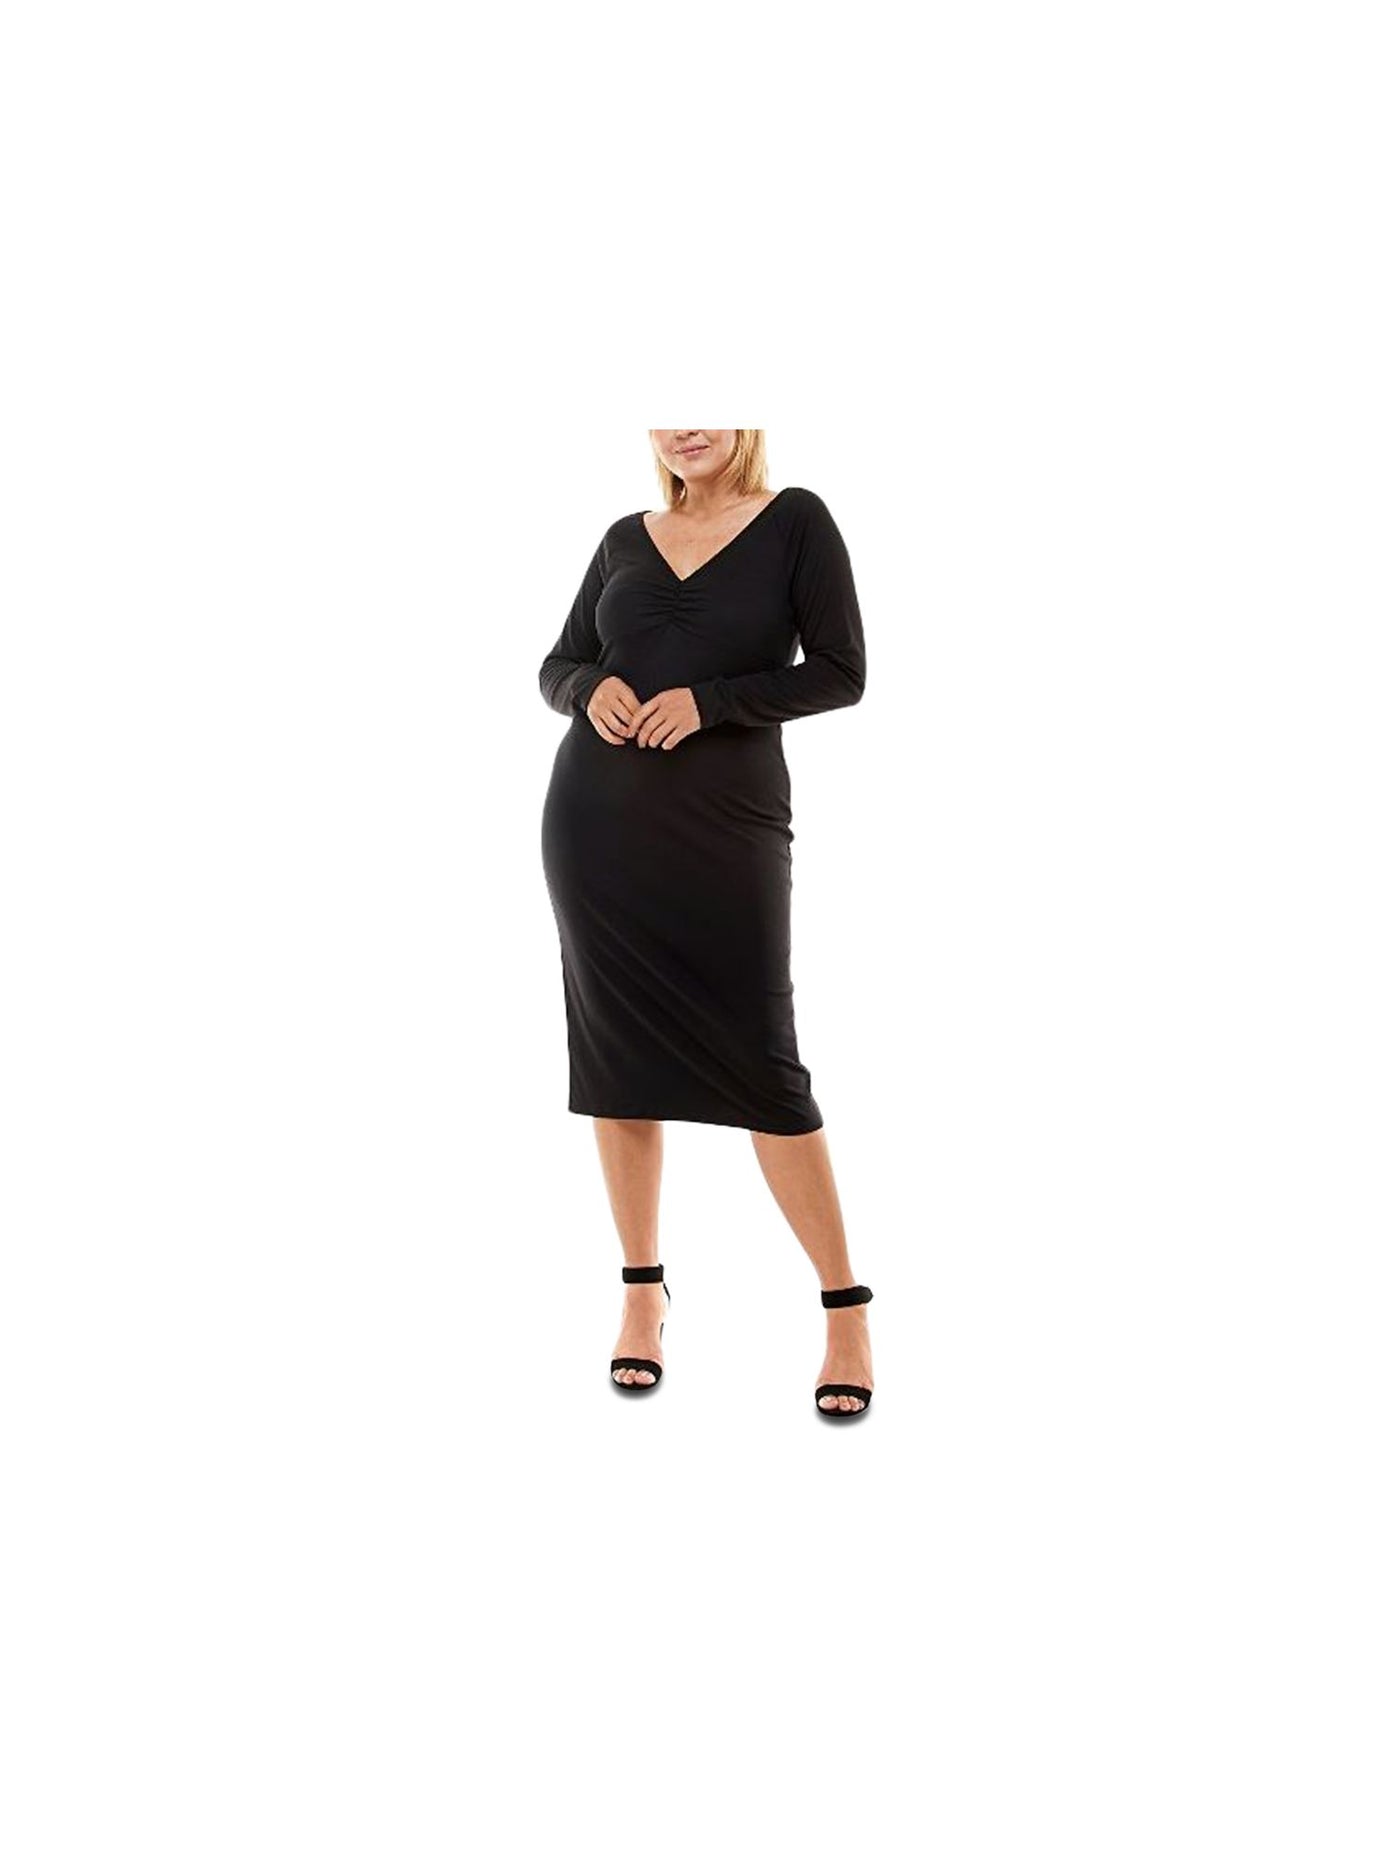 PLANET GOLD Womens Black Stretch Ruched Twisted Back Cutout Long Sleeve V Neck Below The Knee Cocktail Sheath Dress Plus 3X